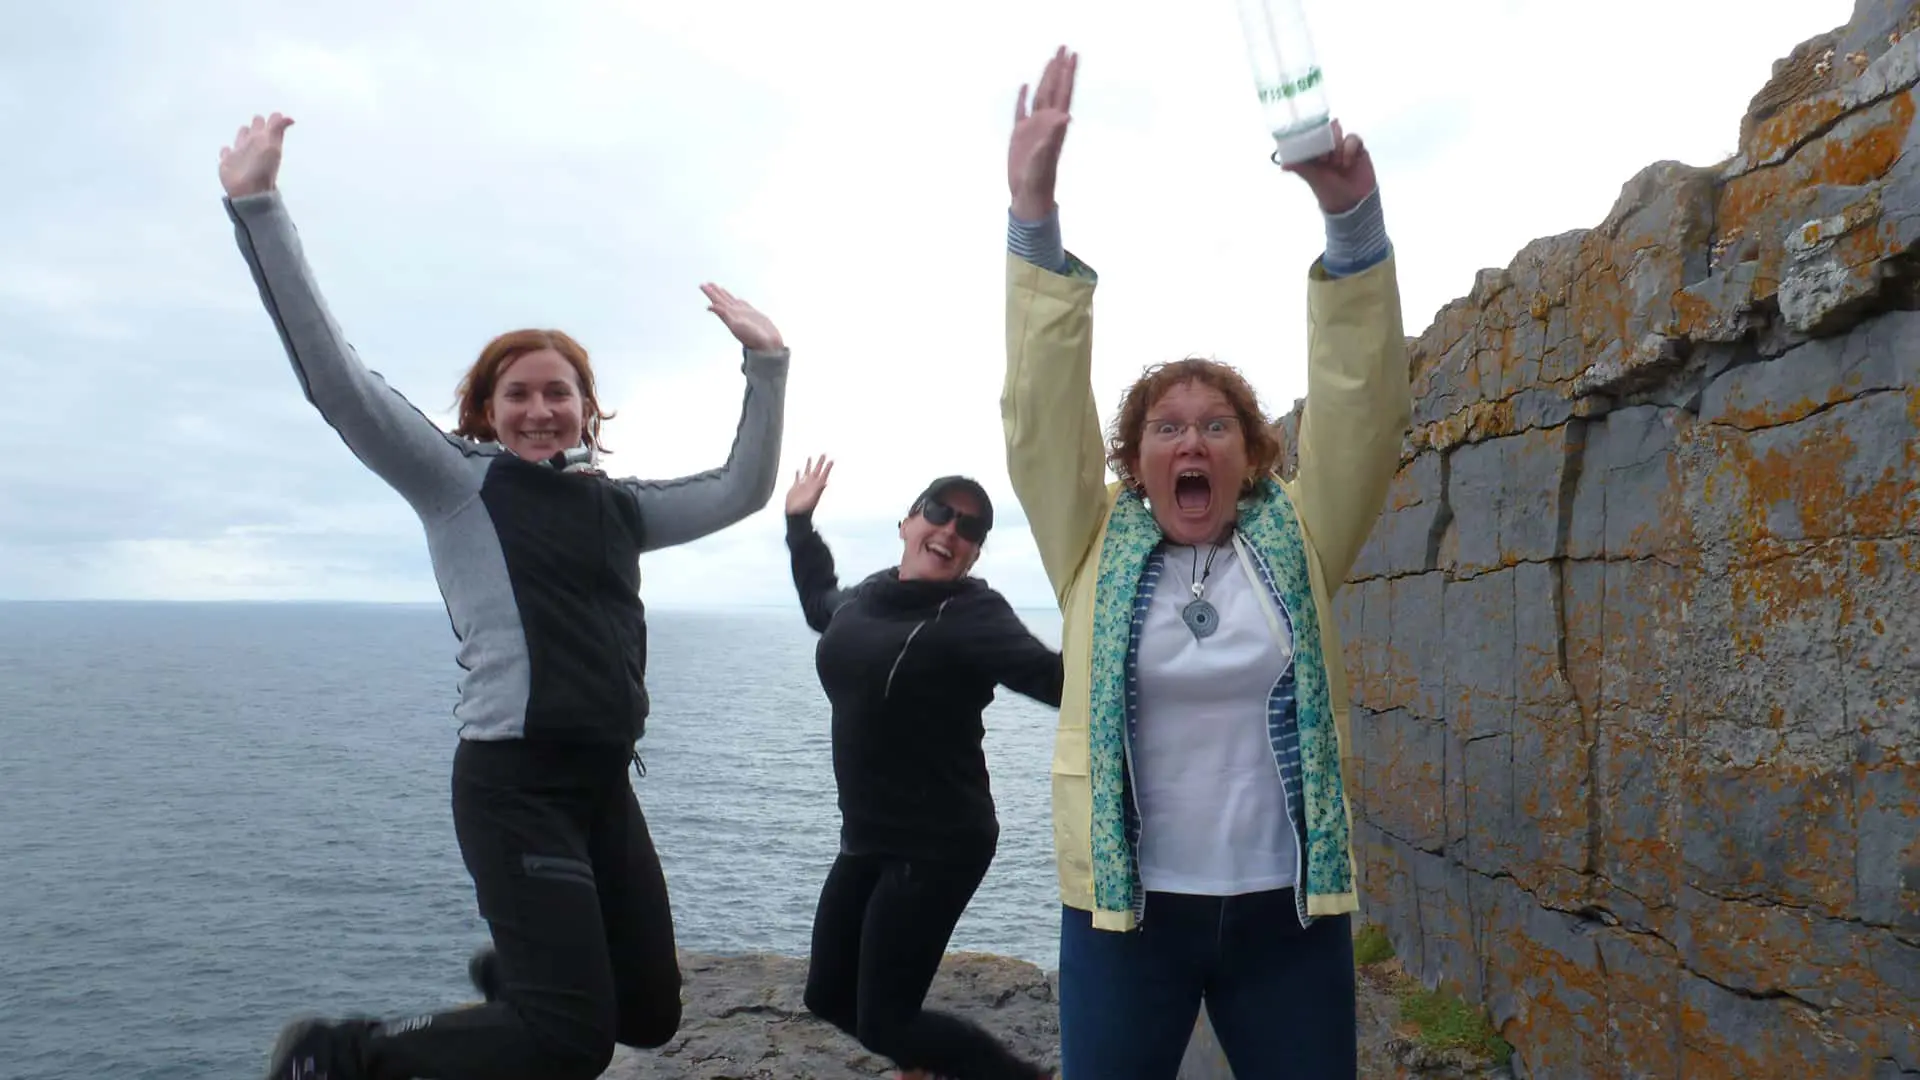 Marie and Ladies Jumping Photo